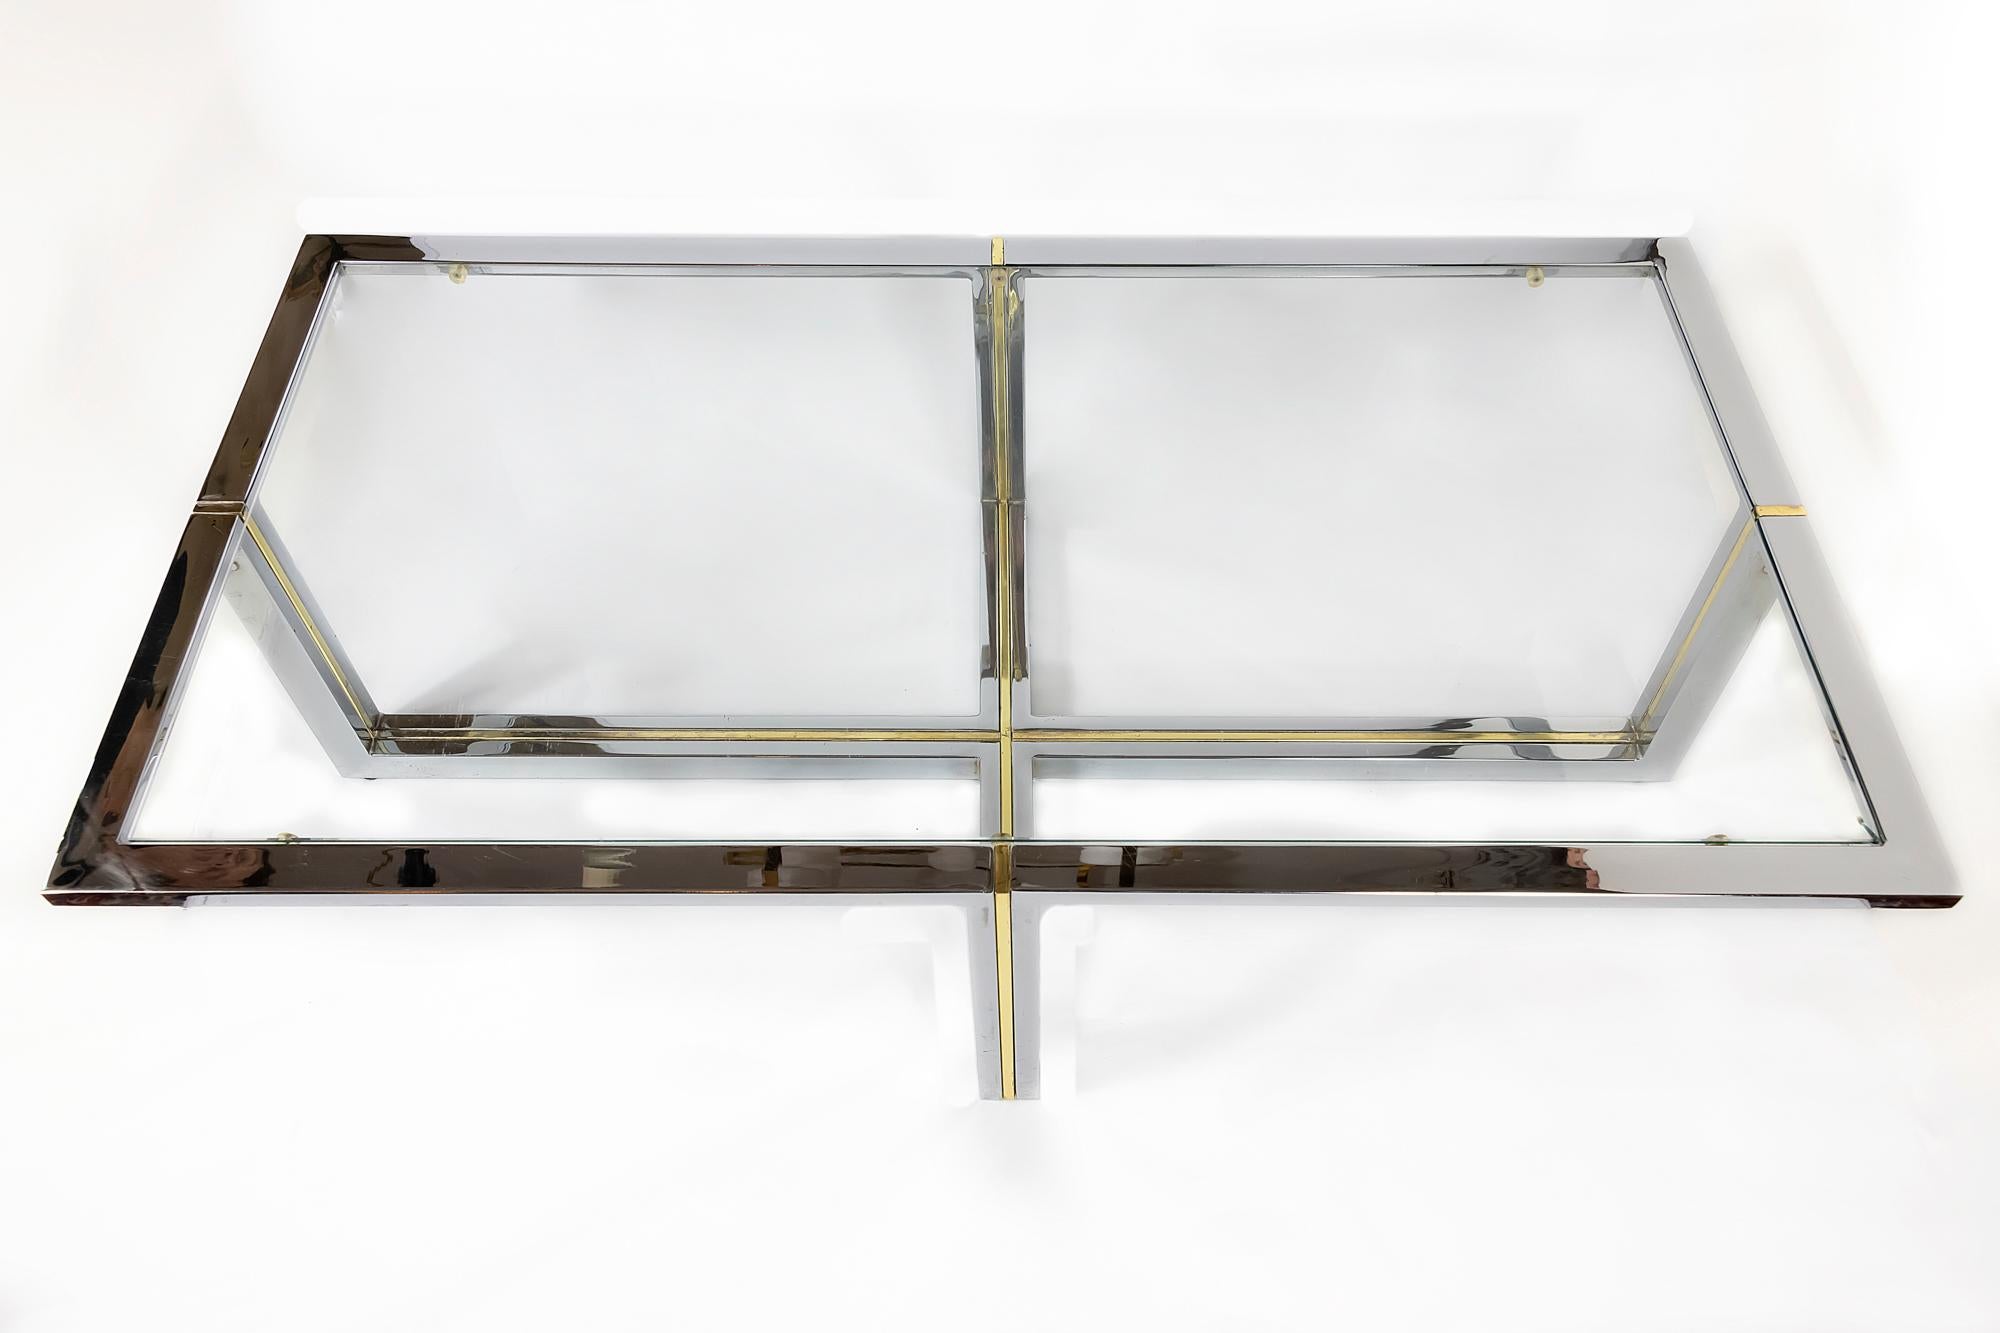 Italian midcentury chrome, brass and glass coffee table. The top of this table is with clear glass. Table base construction is chrome with brass stripes inside.